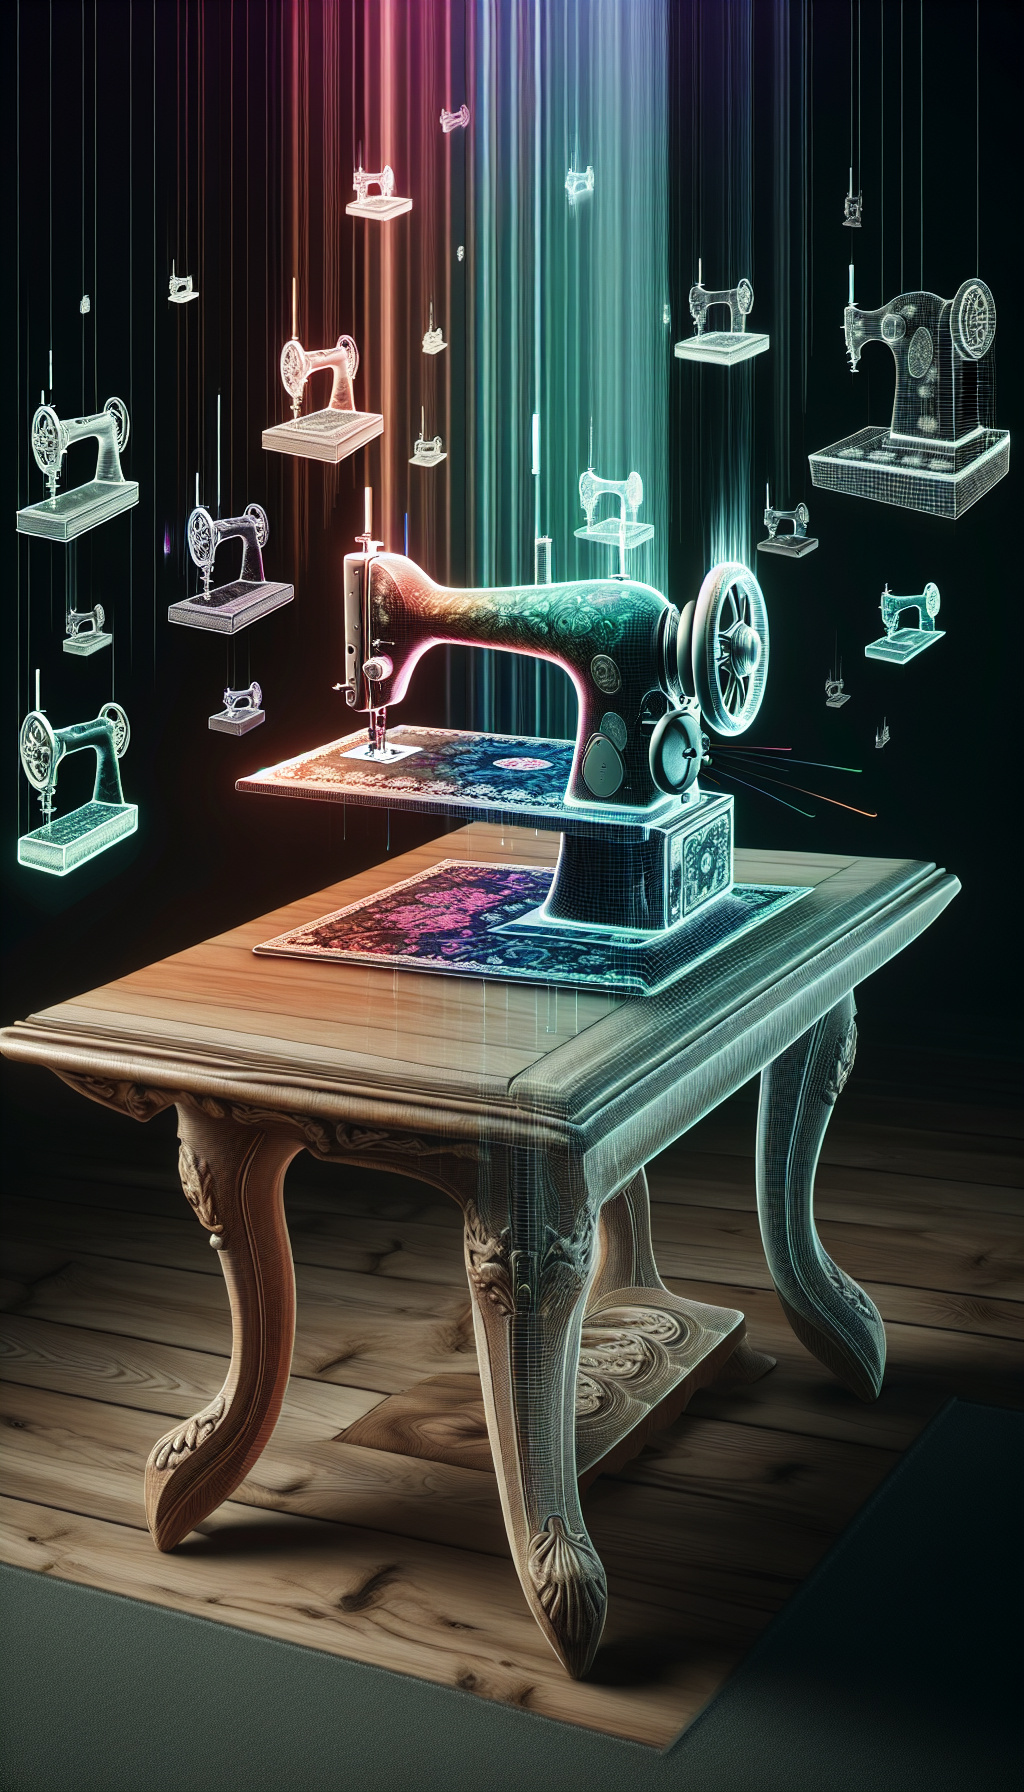 An illustration showcases a ghostly Singer sewing machine phasing between eras atop a regal table, its legs carved with historical timelines. Around the machine, translucent price tags float, each etched with ascending antique values. The table's surface reflects glimpses of different stylistic periods, the wood grains blending seamlessly into fabric patterns sewn through time.